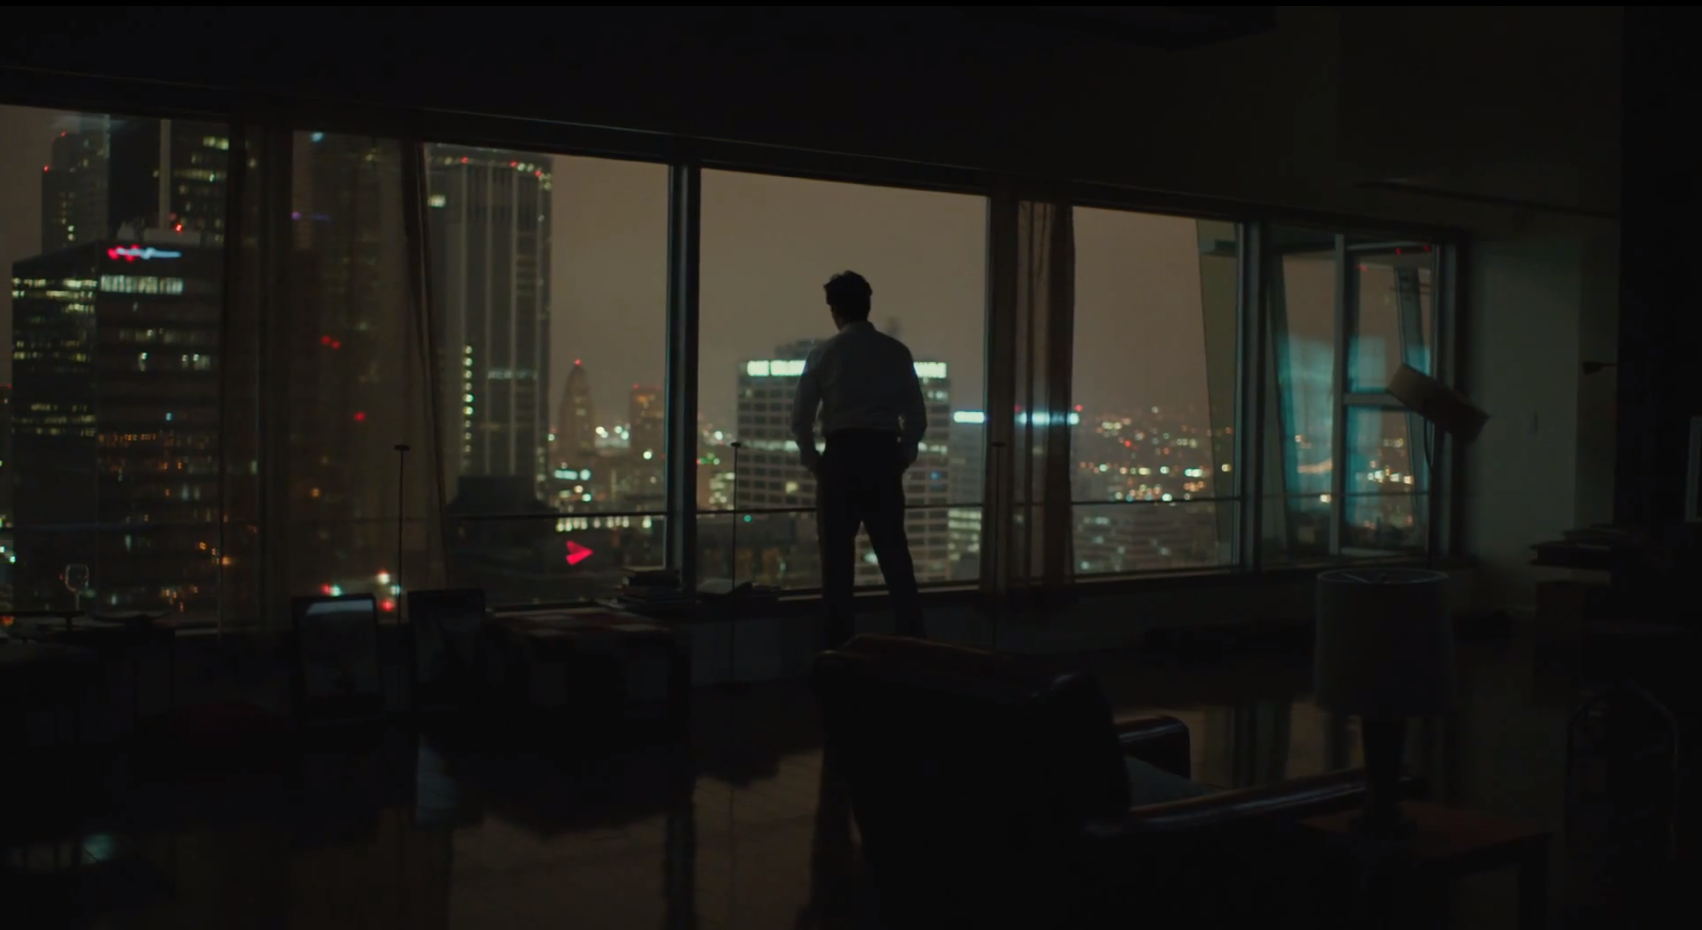 Theodore Twombly's Apartment in the movie "her" is at 705 West 9th Street in Los Angeles, California